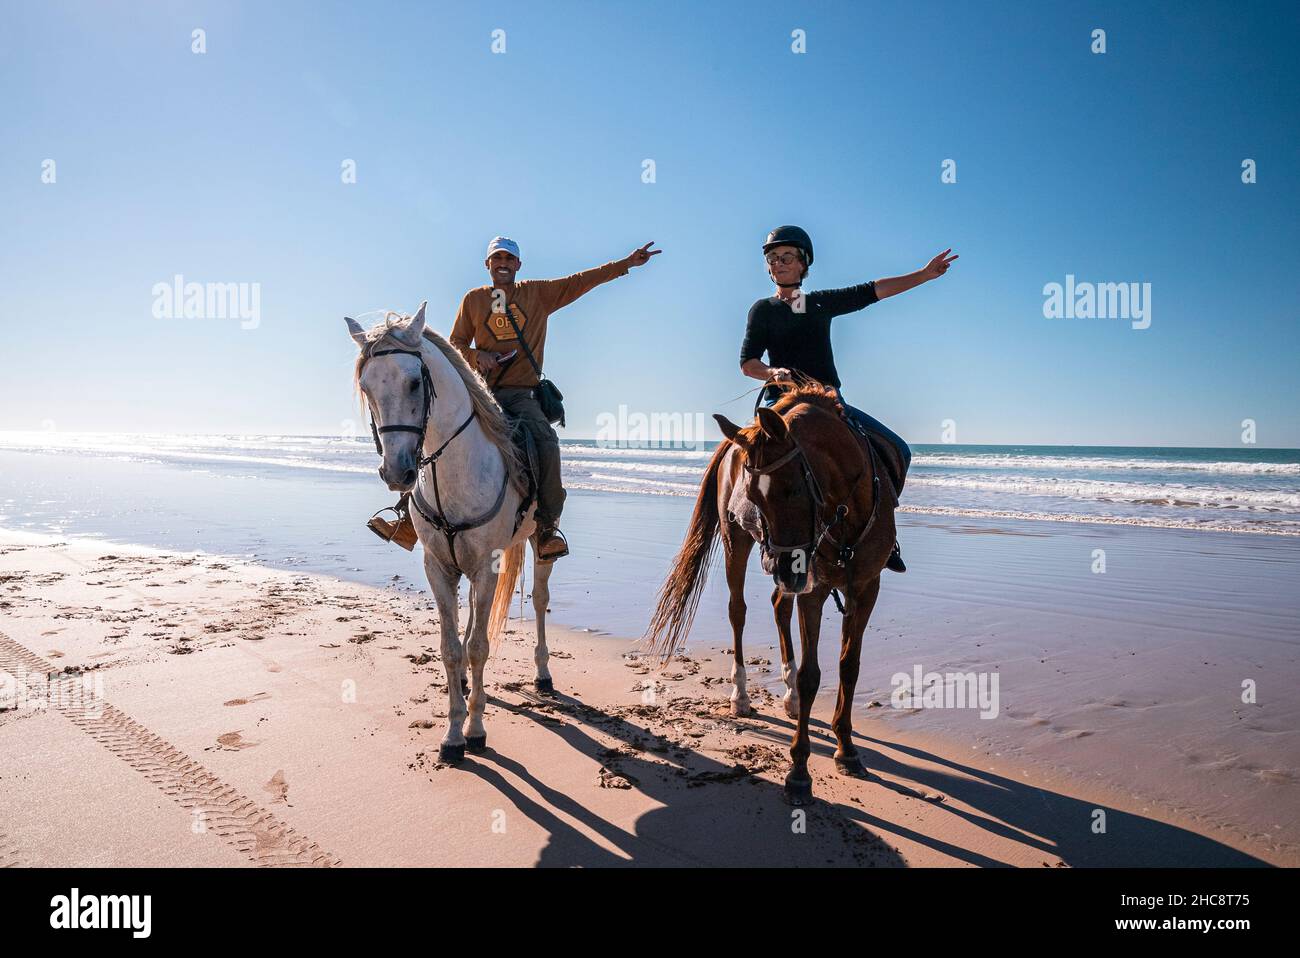 Man and woman showing victory hands gestures while sitting on horses at beach Stock Photo